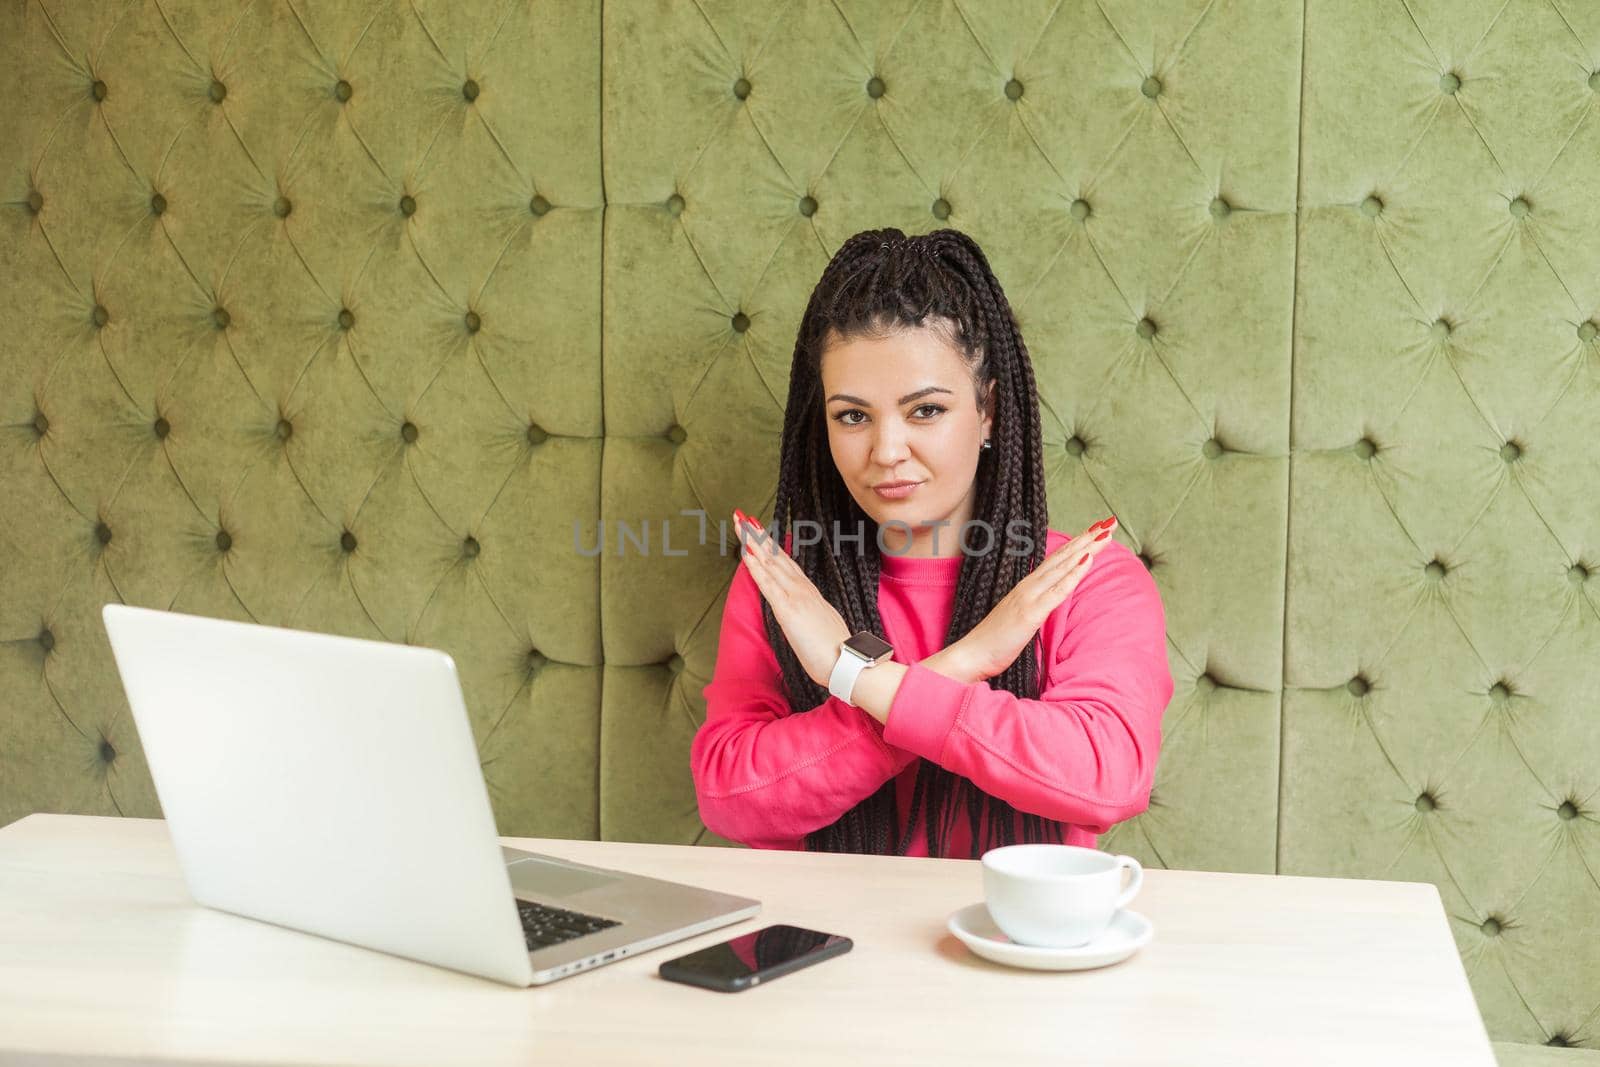 Warning aggressive young girl with black dreadlocks in pink blouse are sitting in cafe and working on laptop, showing crossing raised arms like stop or end gesture, looking at camera. Indoor